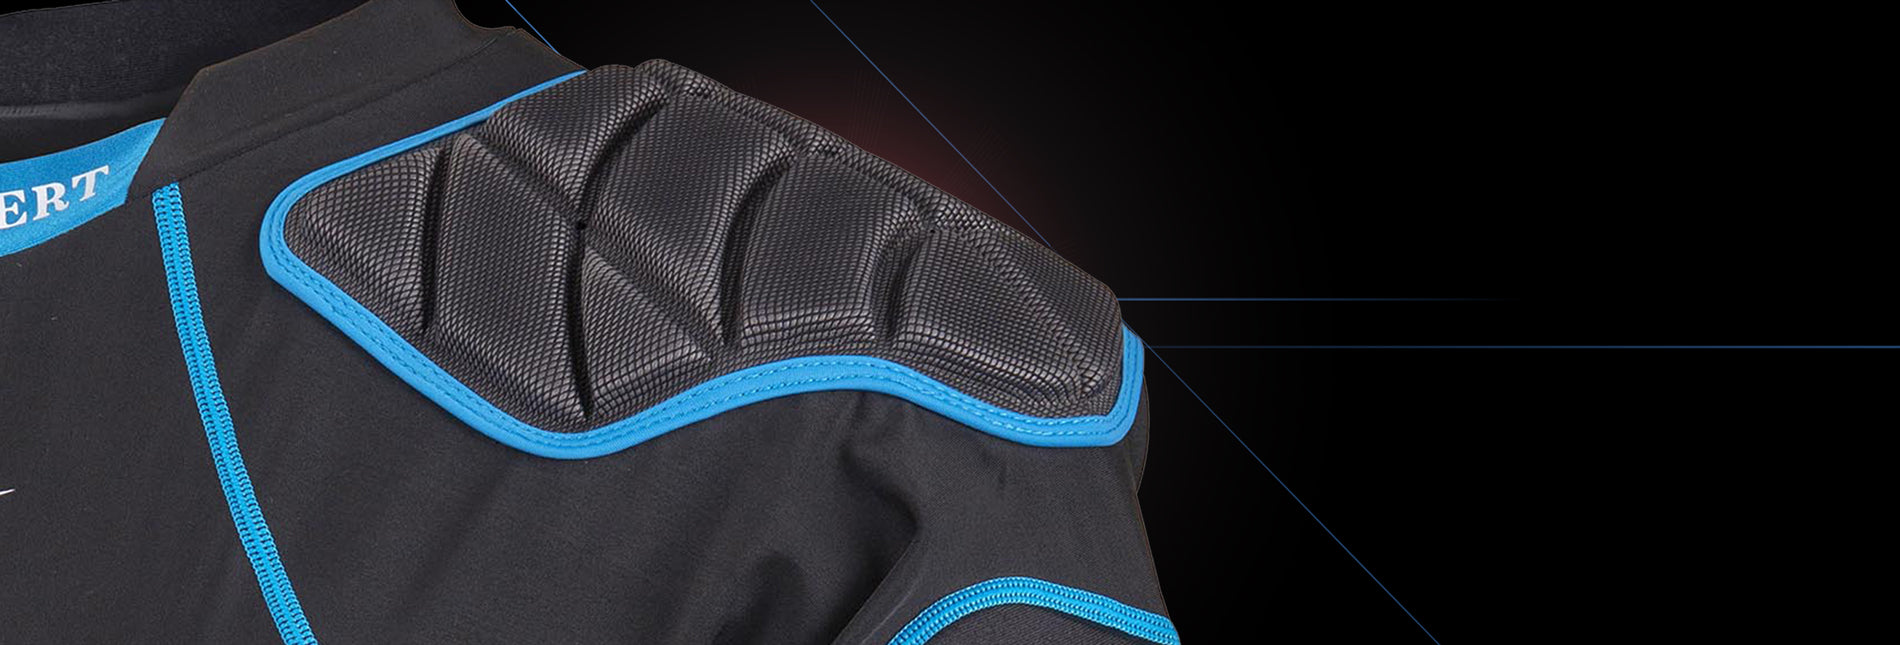 Gilbert Rugby Body Armour and Head Guard Technology - Explained